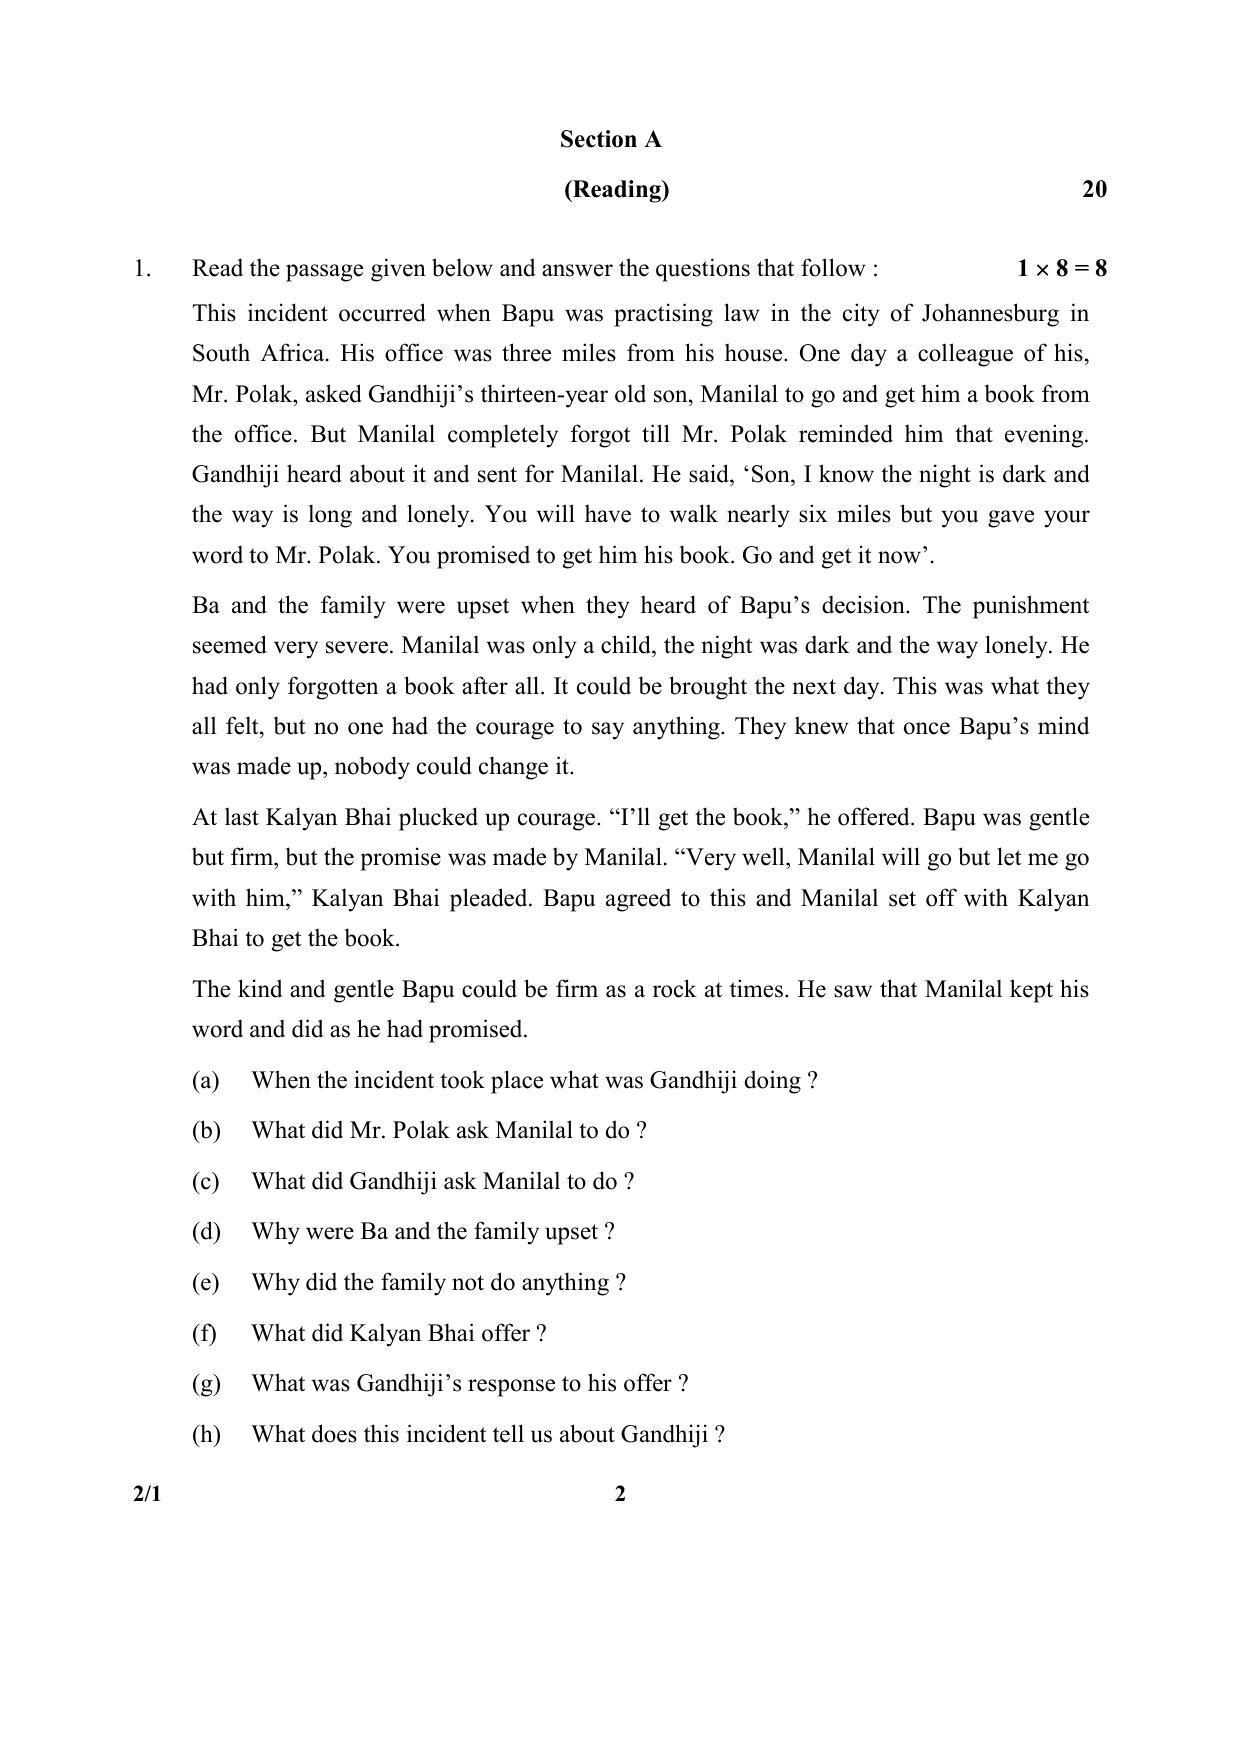 CBSE Class 10 2-1 English (Language And Literature) 2017-comptt Question Paper - Page 2